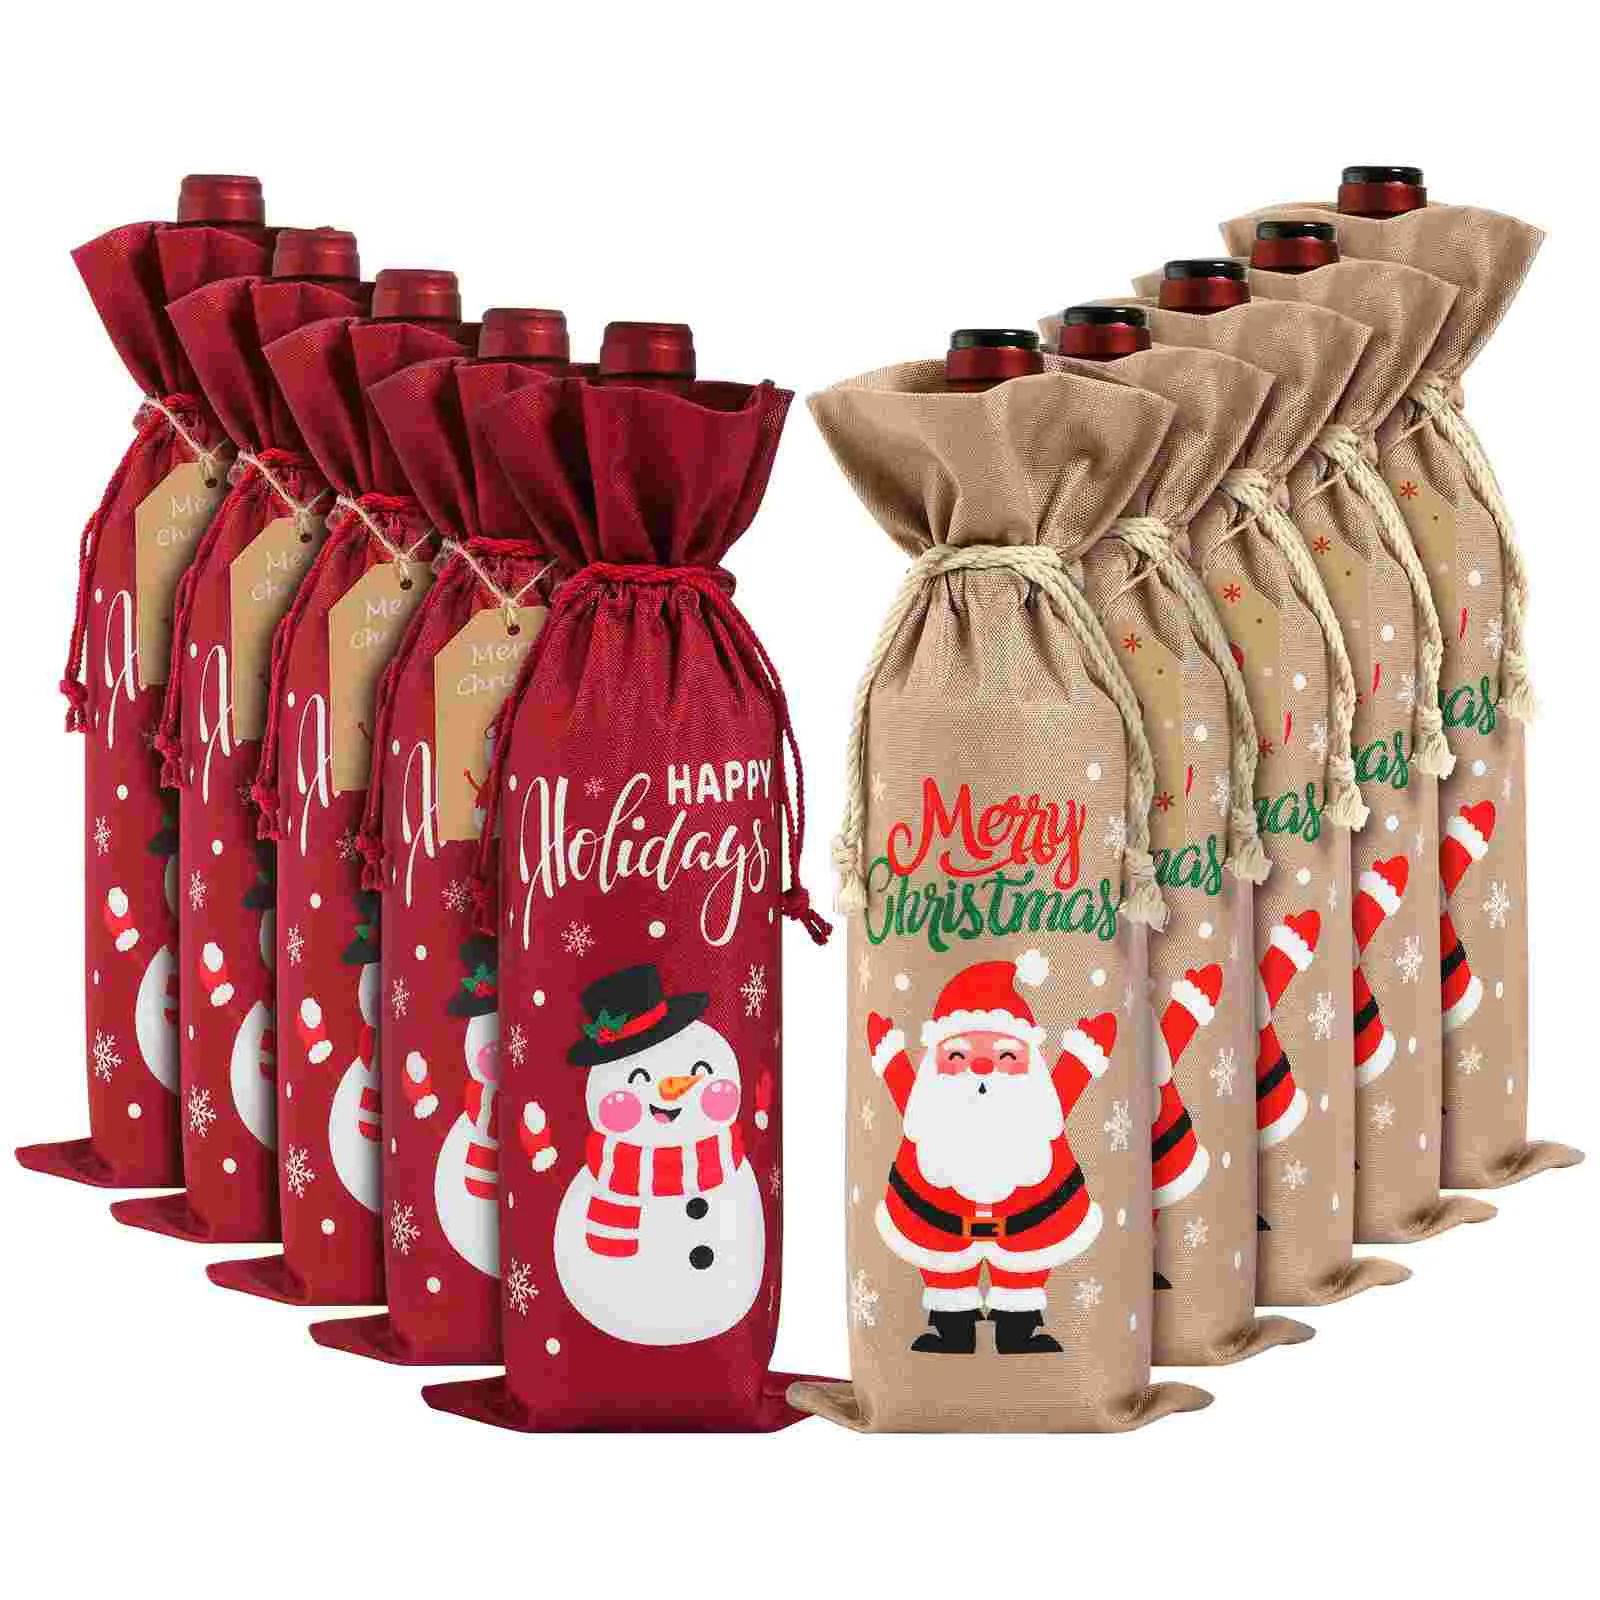 

LUXSHINY 10pcs Bottle Carrier Bags Christmas Gift Bags Burlap Party Favor Bags Drawstring Bags with Tags